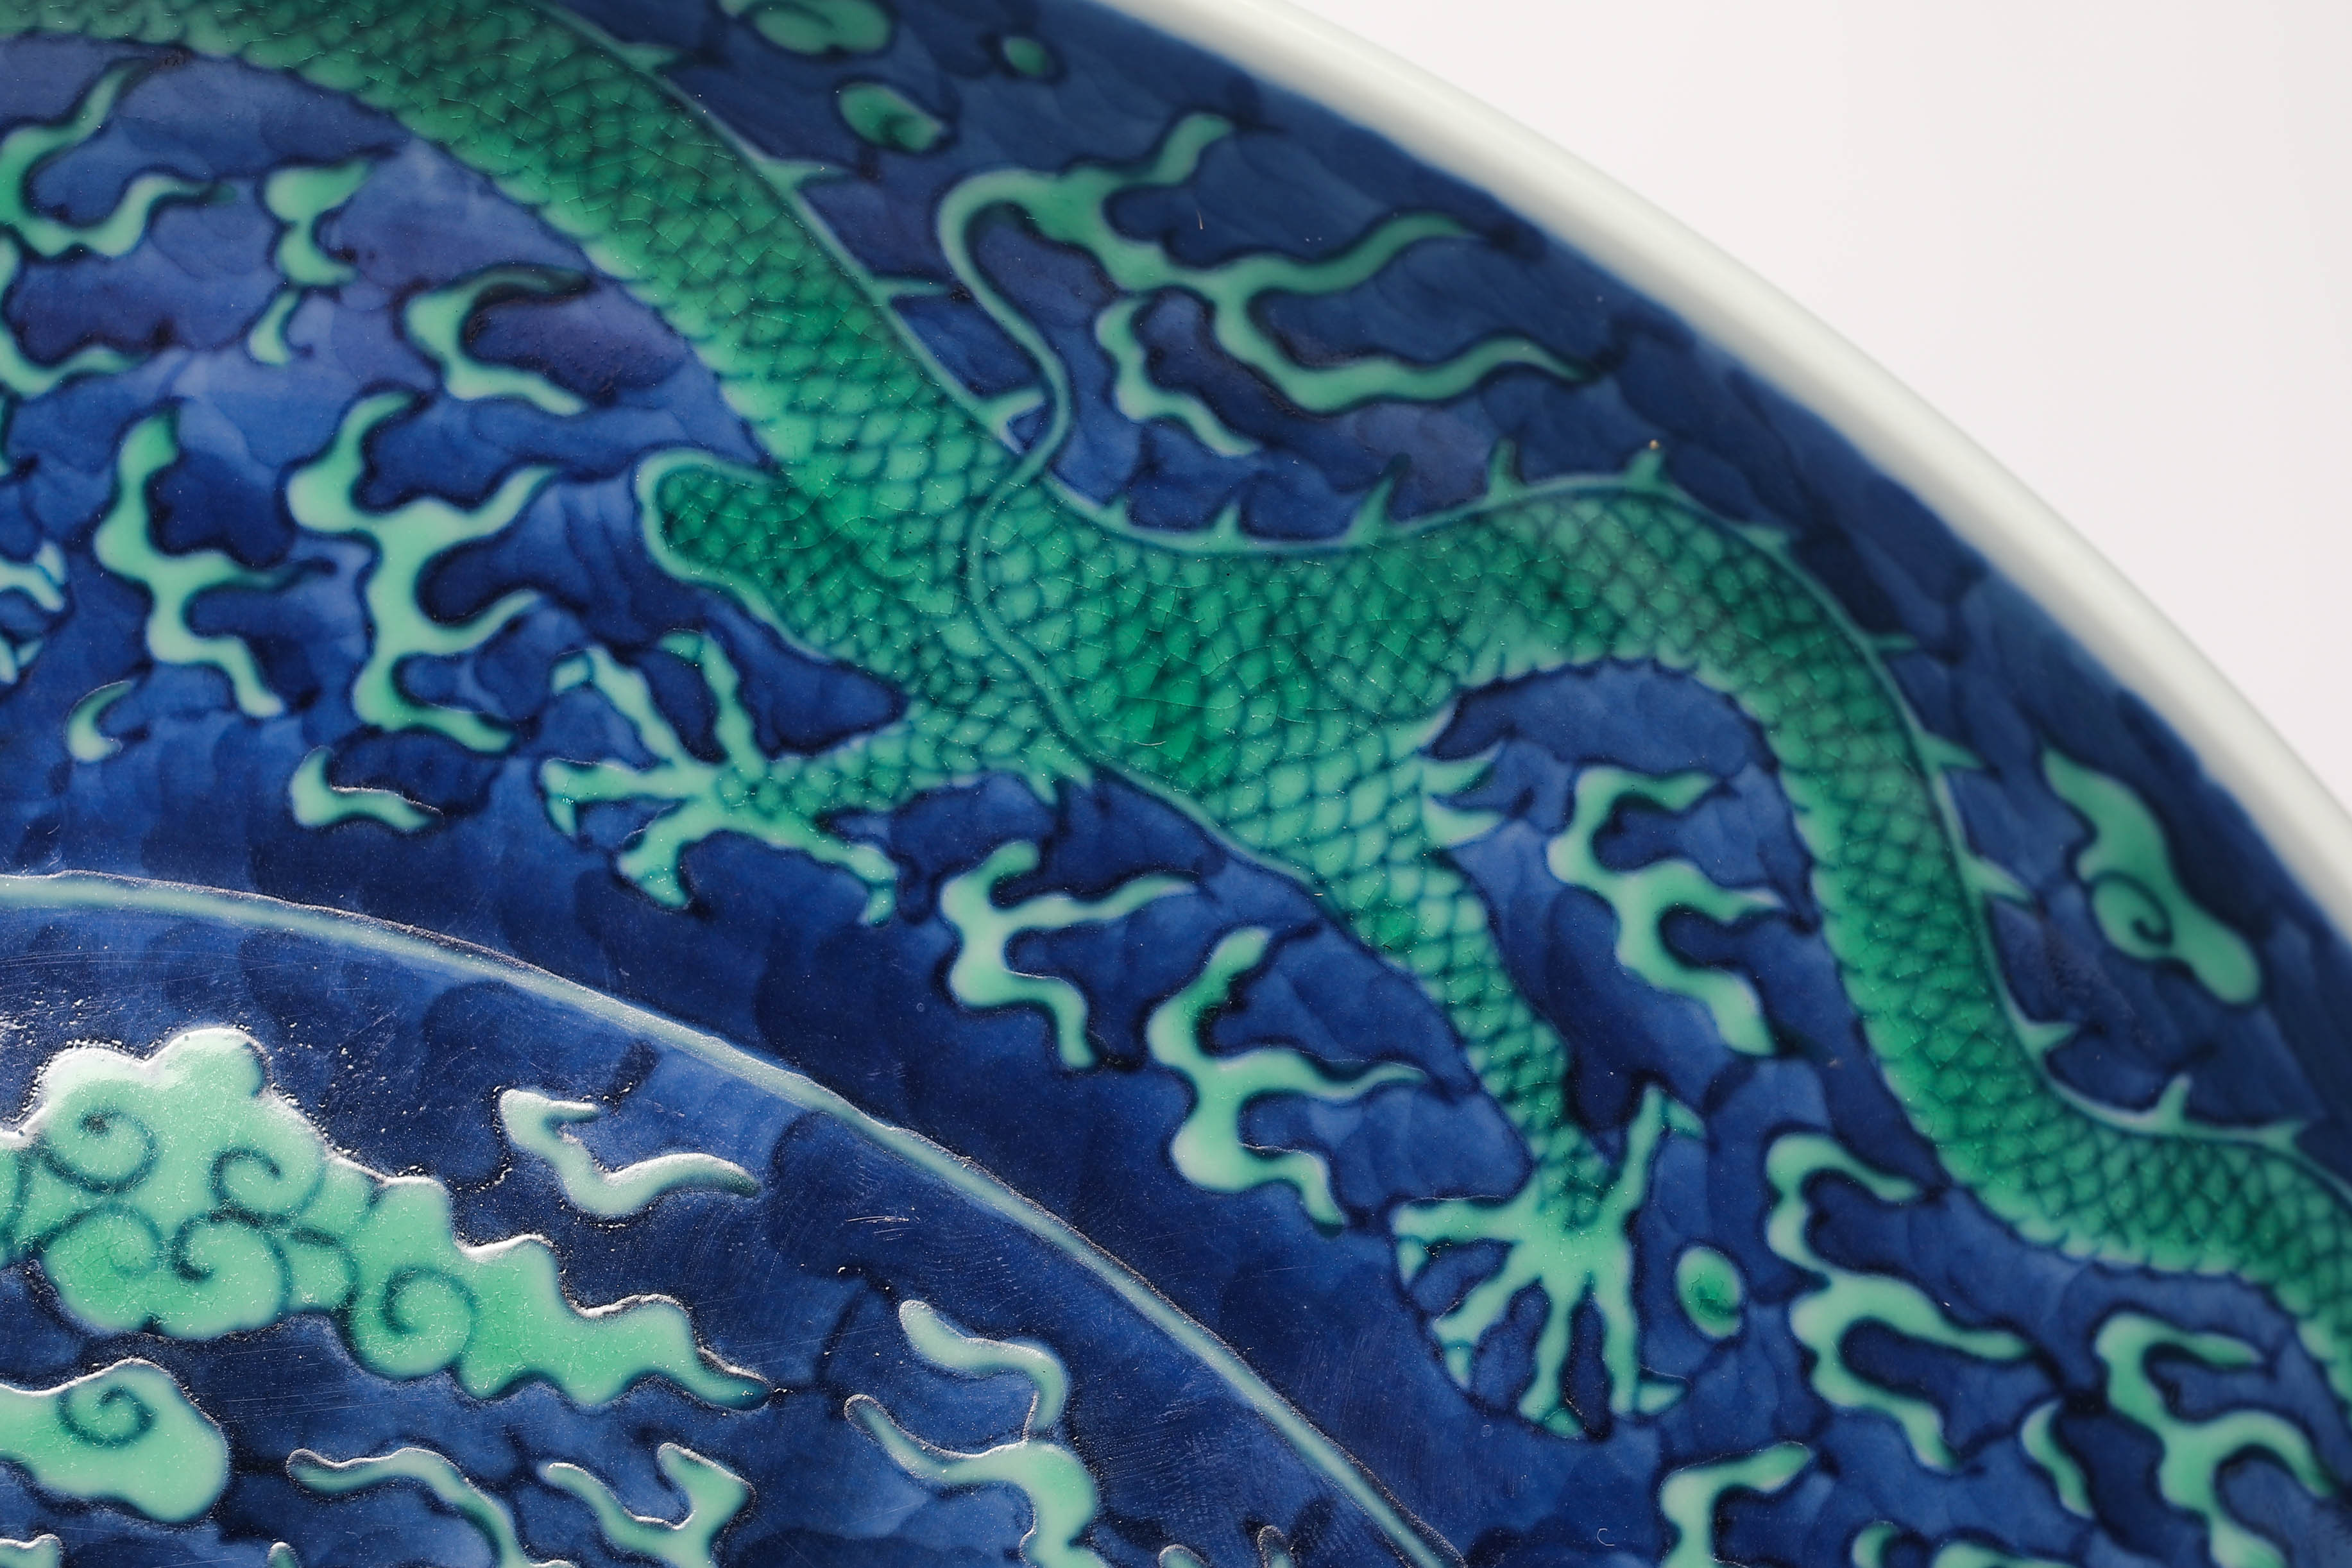 Qing dynasty blue land green dragon pattern plate - Image 7 of 11